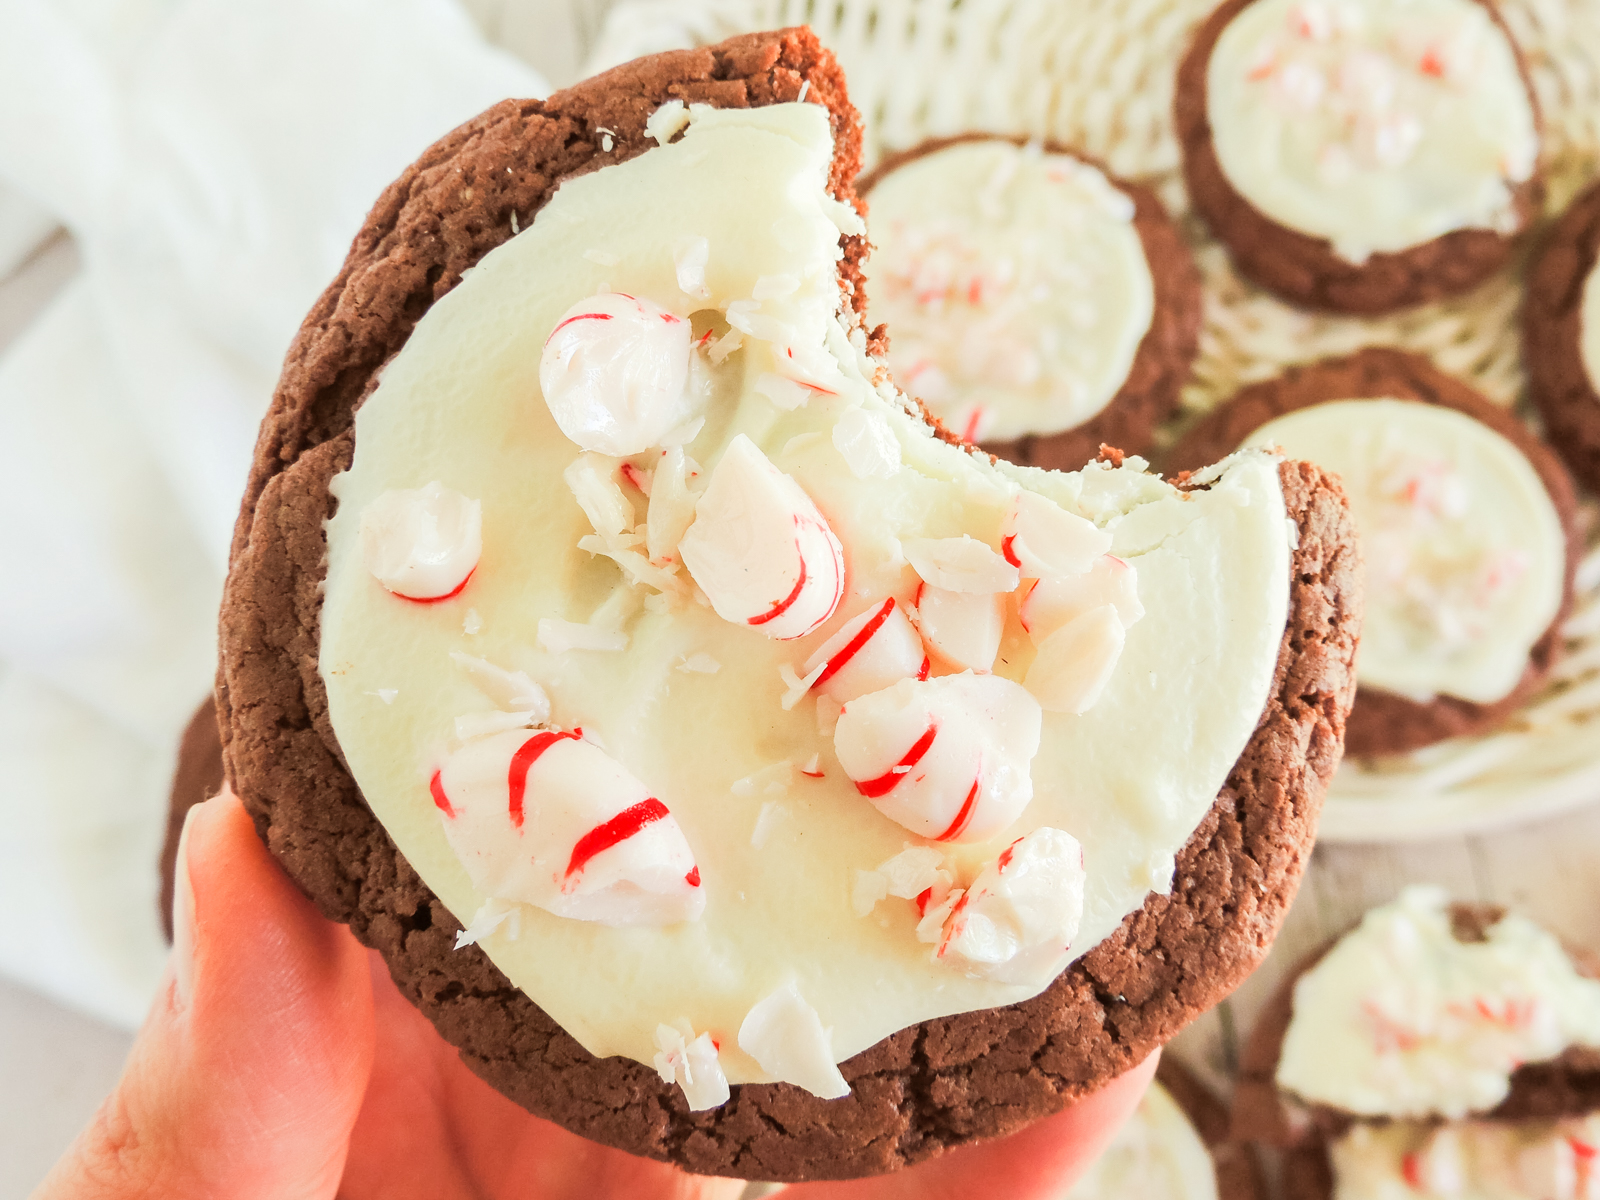 Chocolate Peppermint Cake Mix Cookies